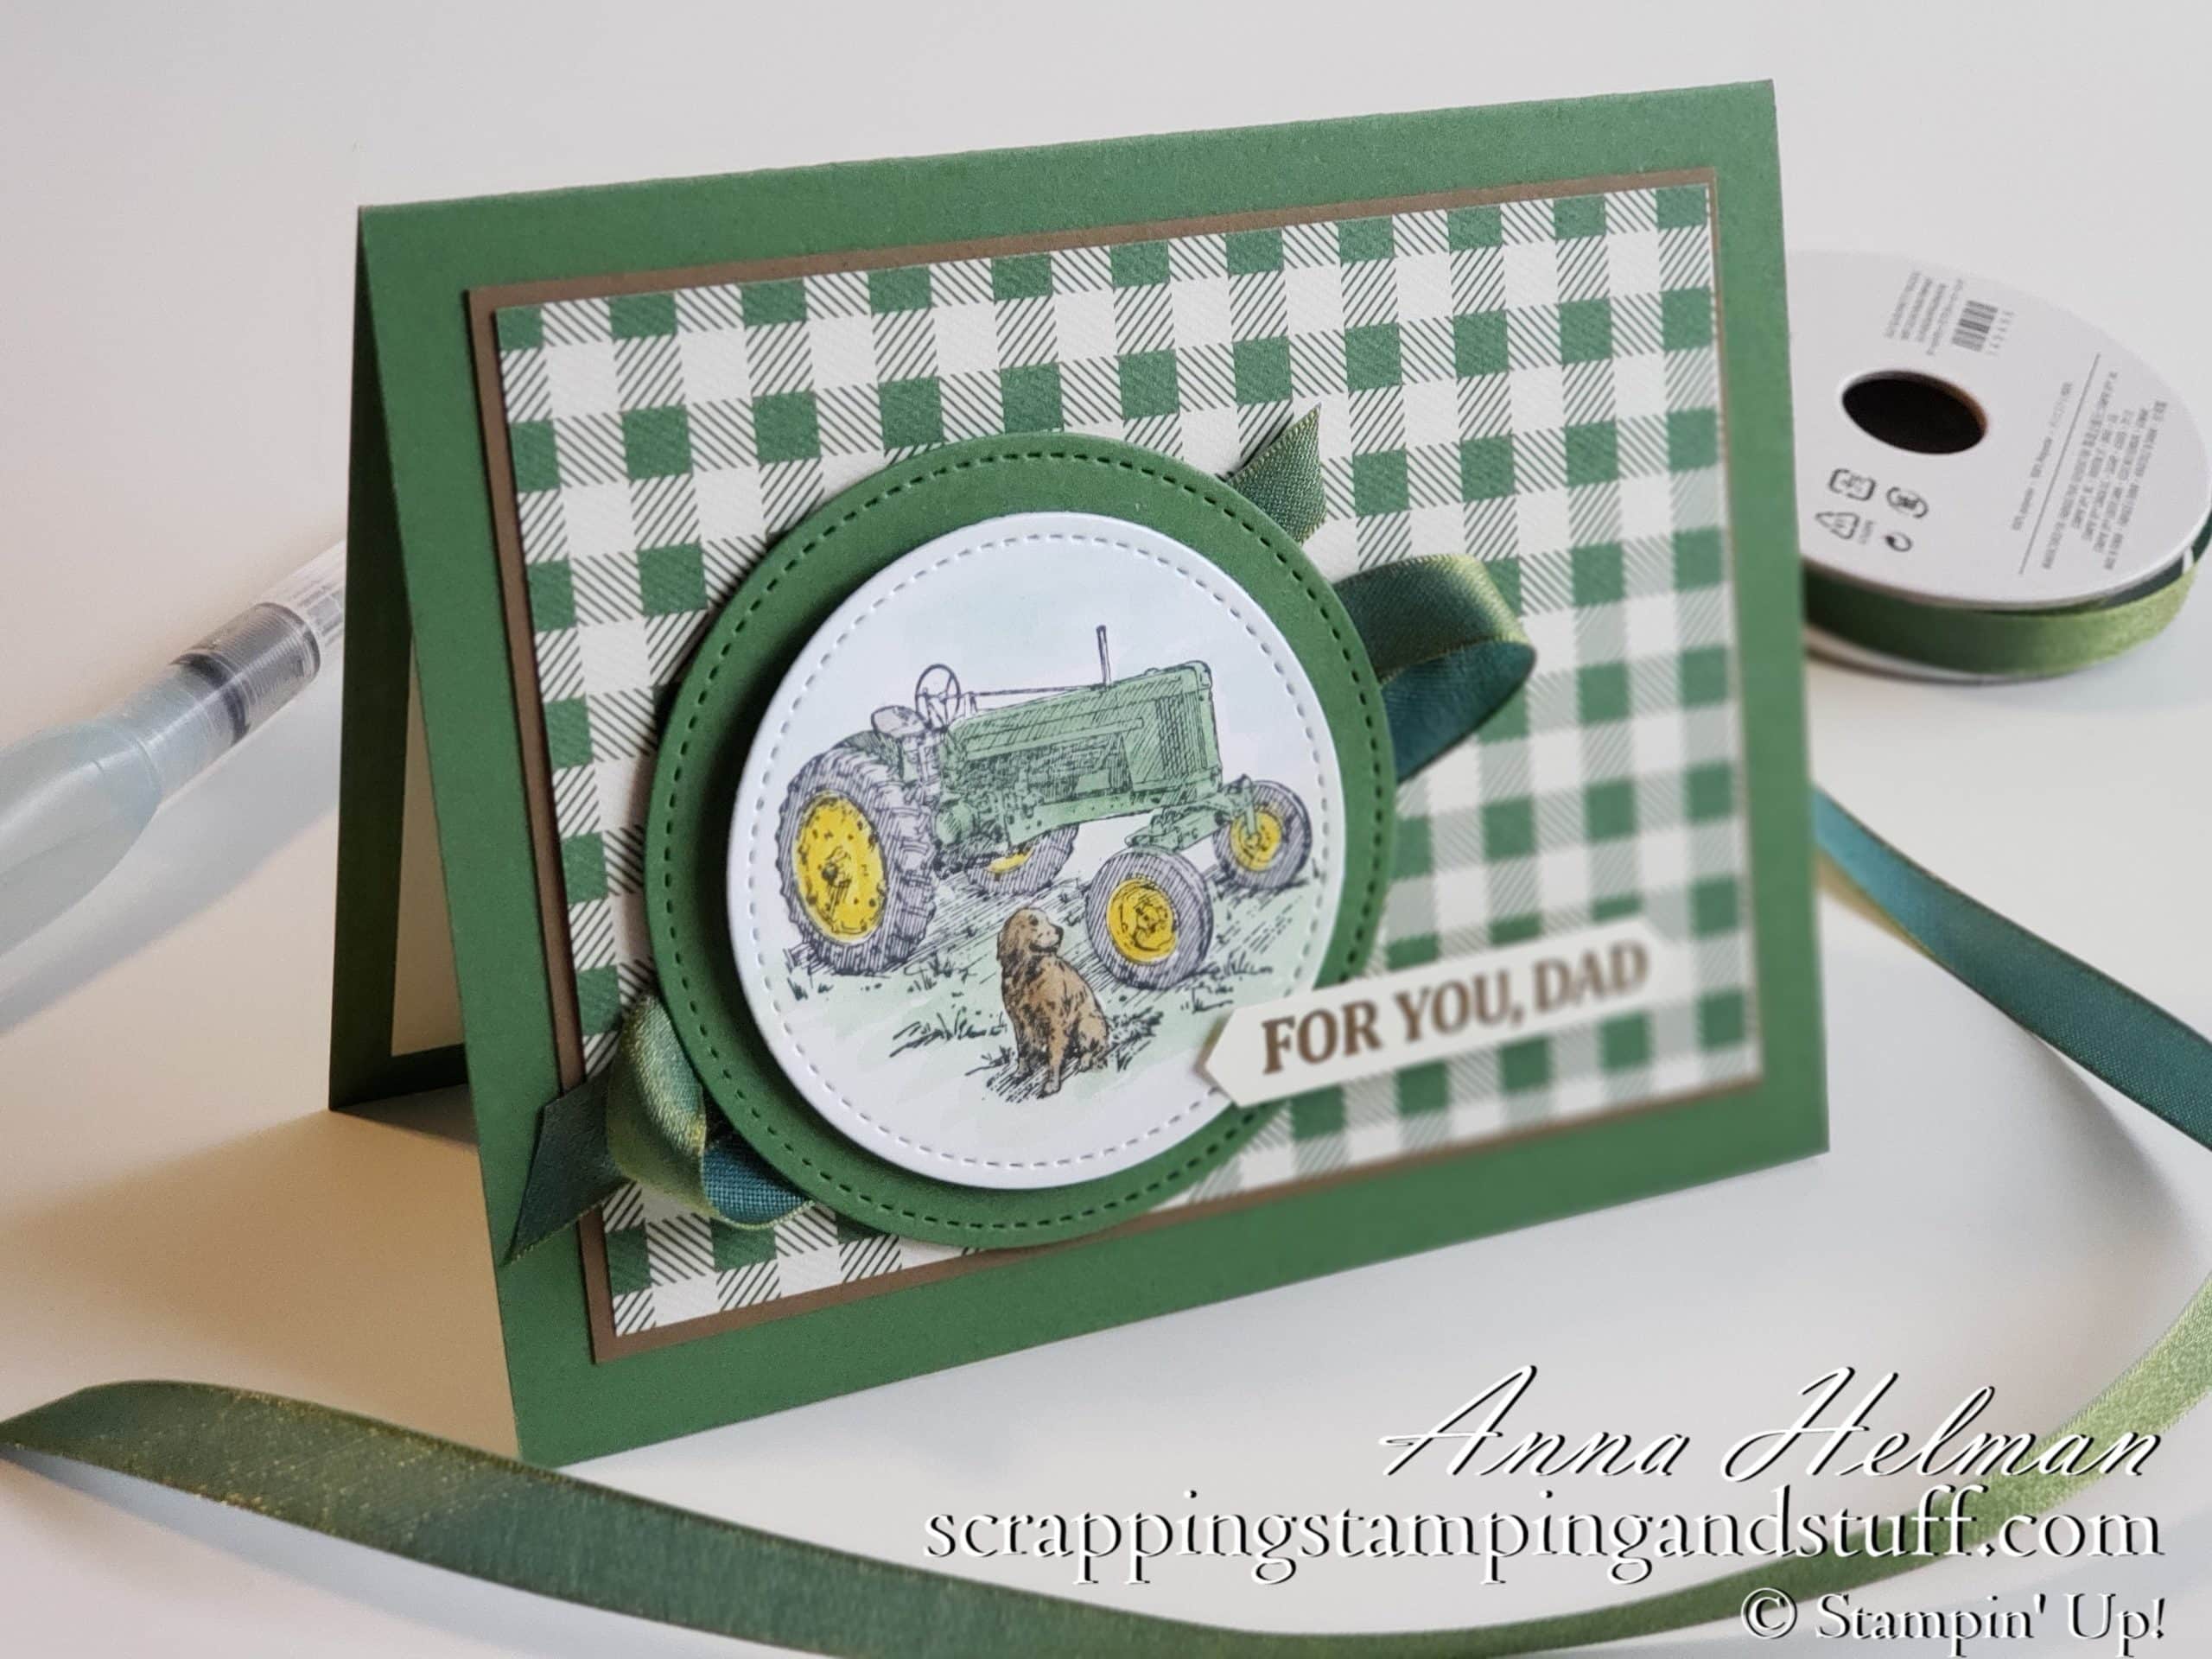 It’s a Handmade Tractor Card!